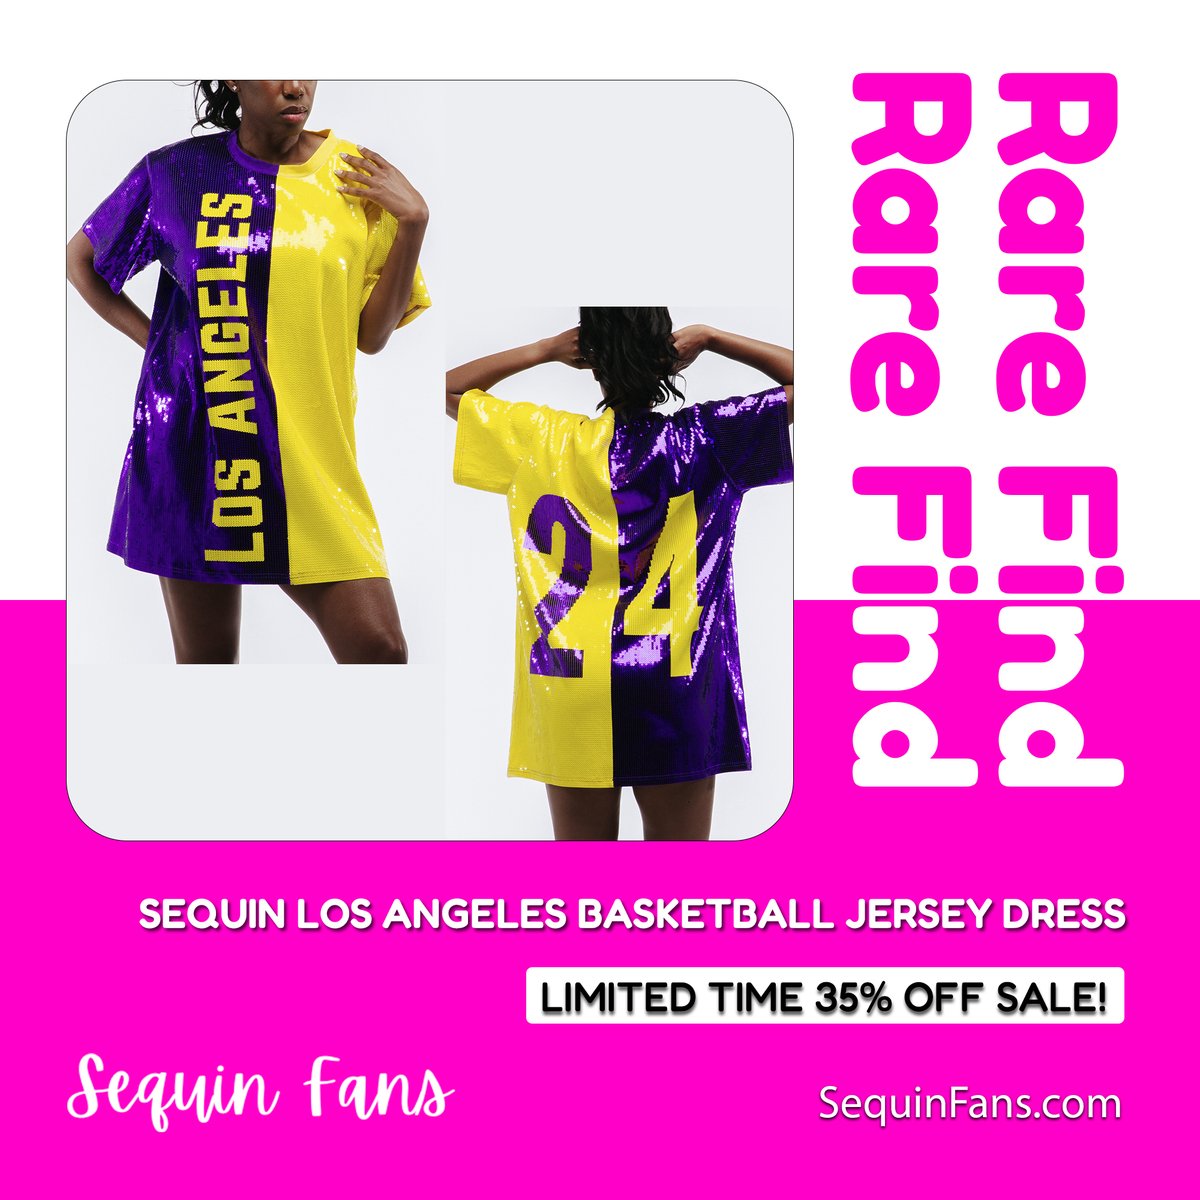 🌟 LA fans, where you at? Score big on style with our Sequin Los Angeles Basketball Jersey Dress. 🏀 Right now, get it at 35% off! Check to see this dazzling number up close! ✨

🔗 Click the link in our bio to shop now!
#SequinFans #LAStyle #BasketballFashion #LimitedTimeSale